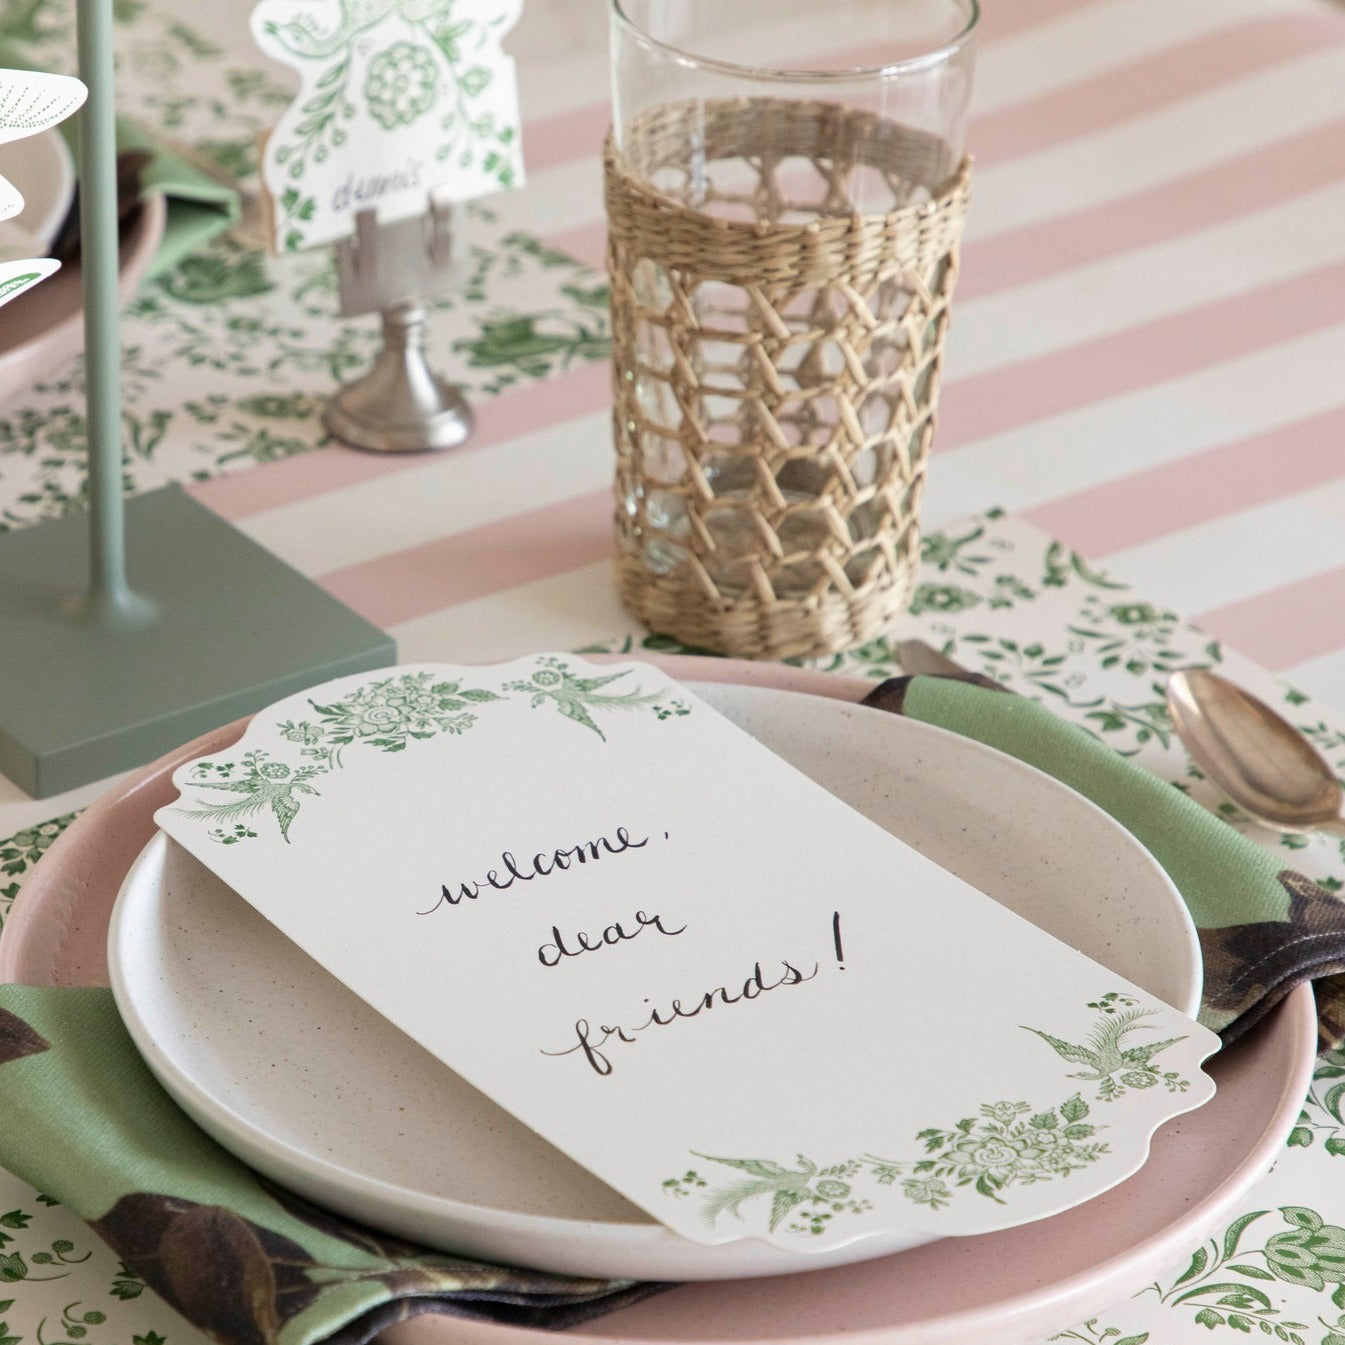 A Green Asiatic Pheasants Table Card with &quot;Welcome, dear friends!&quot; written on it in cursive resting on the plate of an elegant place setting.